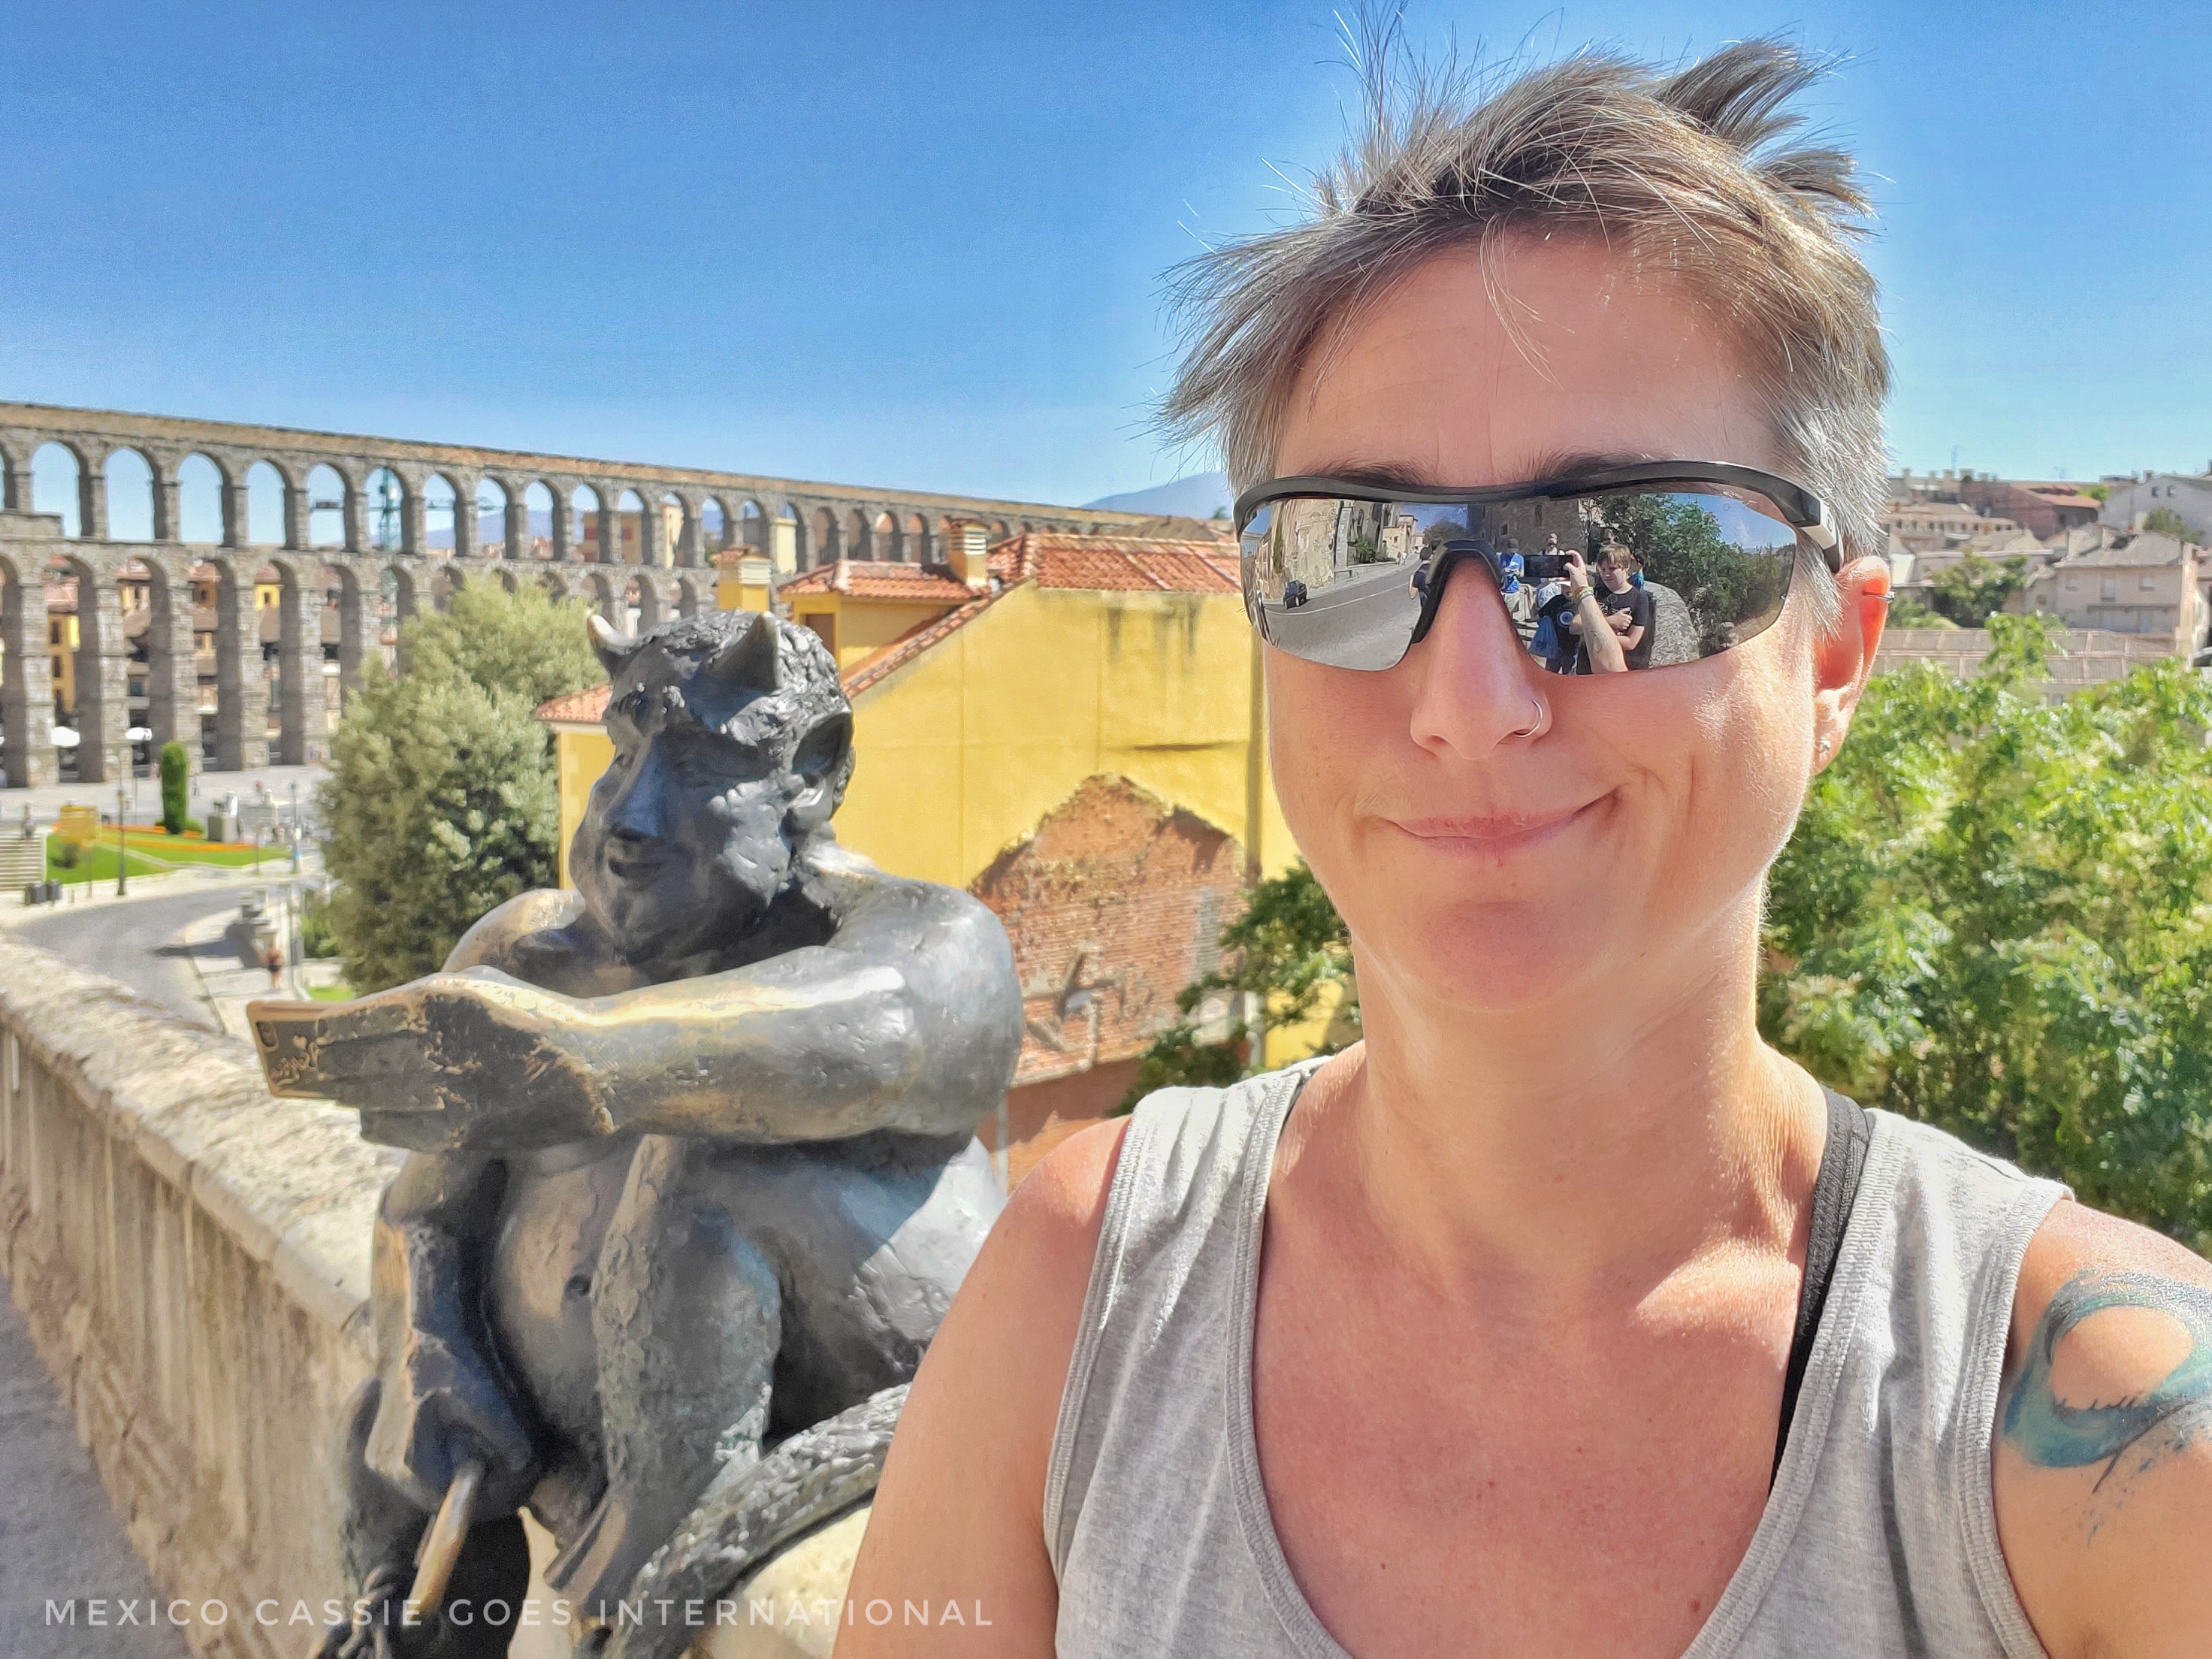 Cassie in sunglasses and grey tshirt with diablo sculpture (he's small and holding a phone). Aqueduct in background